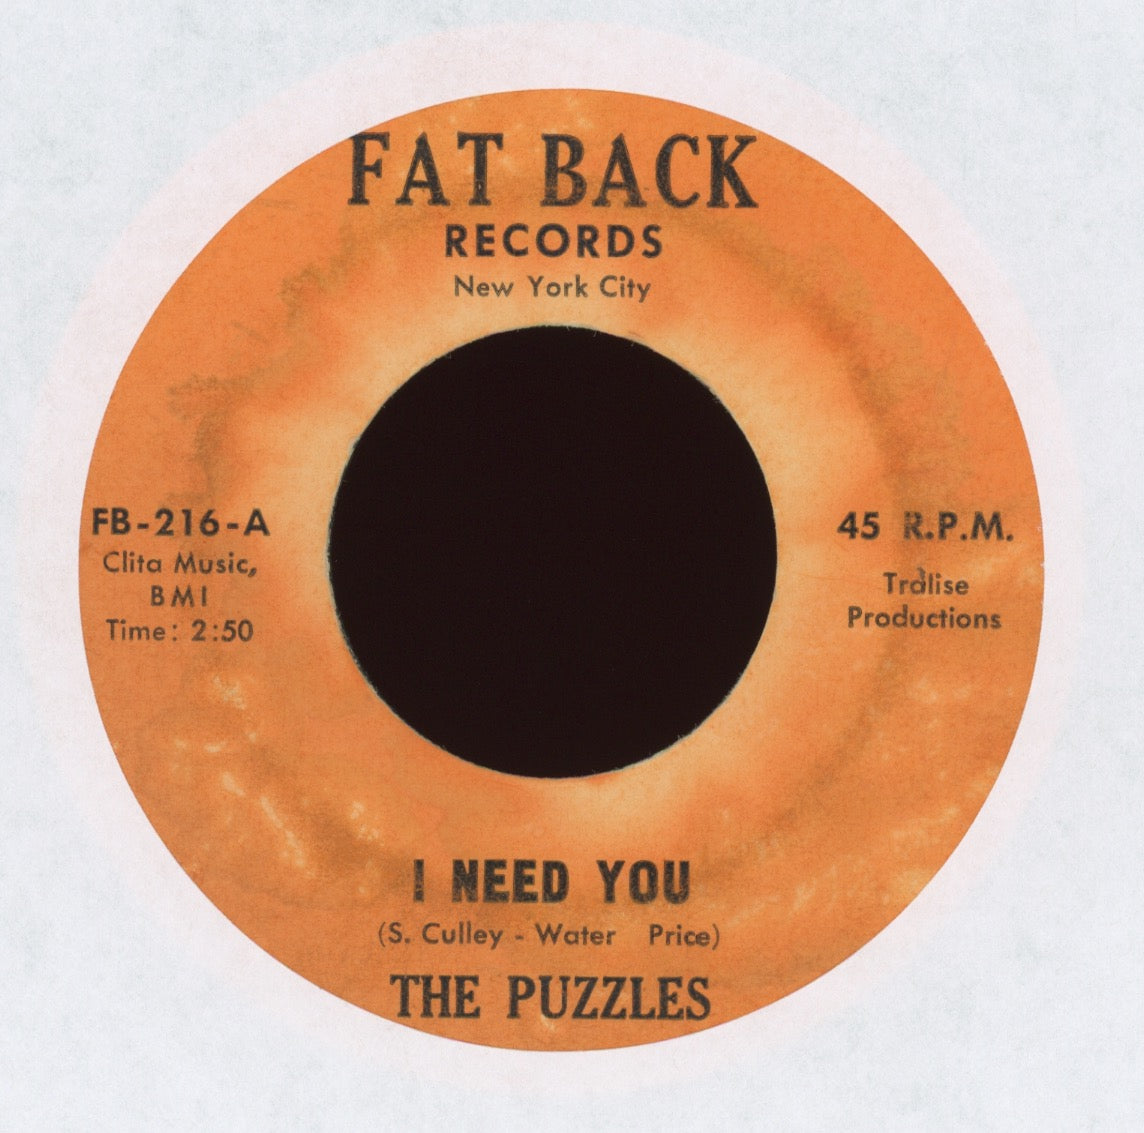 The Puzzles - I Need You on Fat Back Northern Soul 45